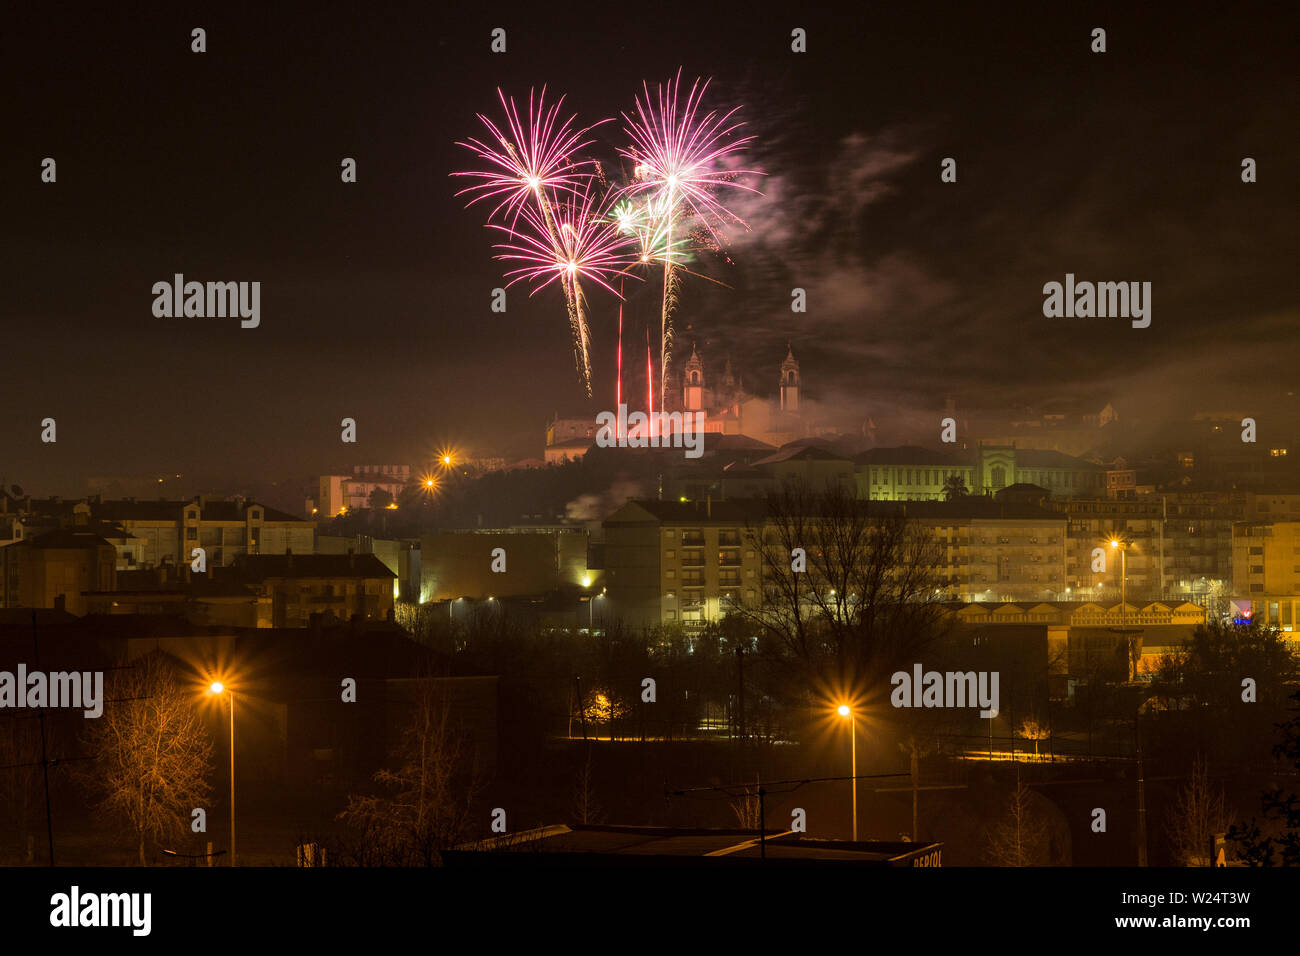 Fireworks at night in Viseu Stock Photo